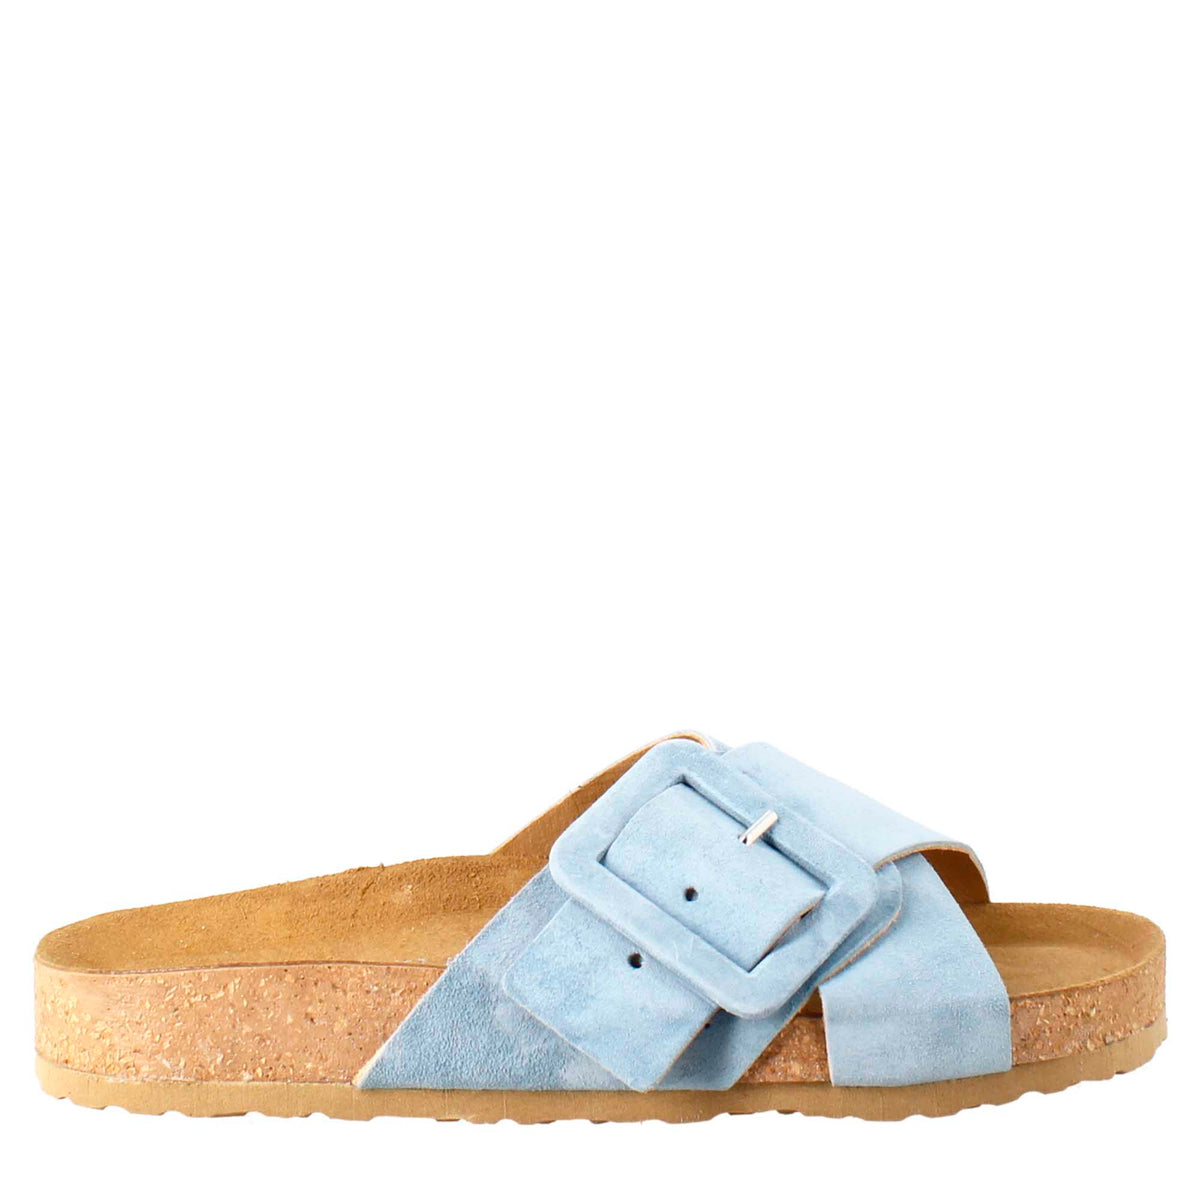 Women's sandal with double band and buckle in light blue suede